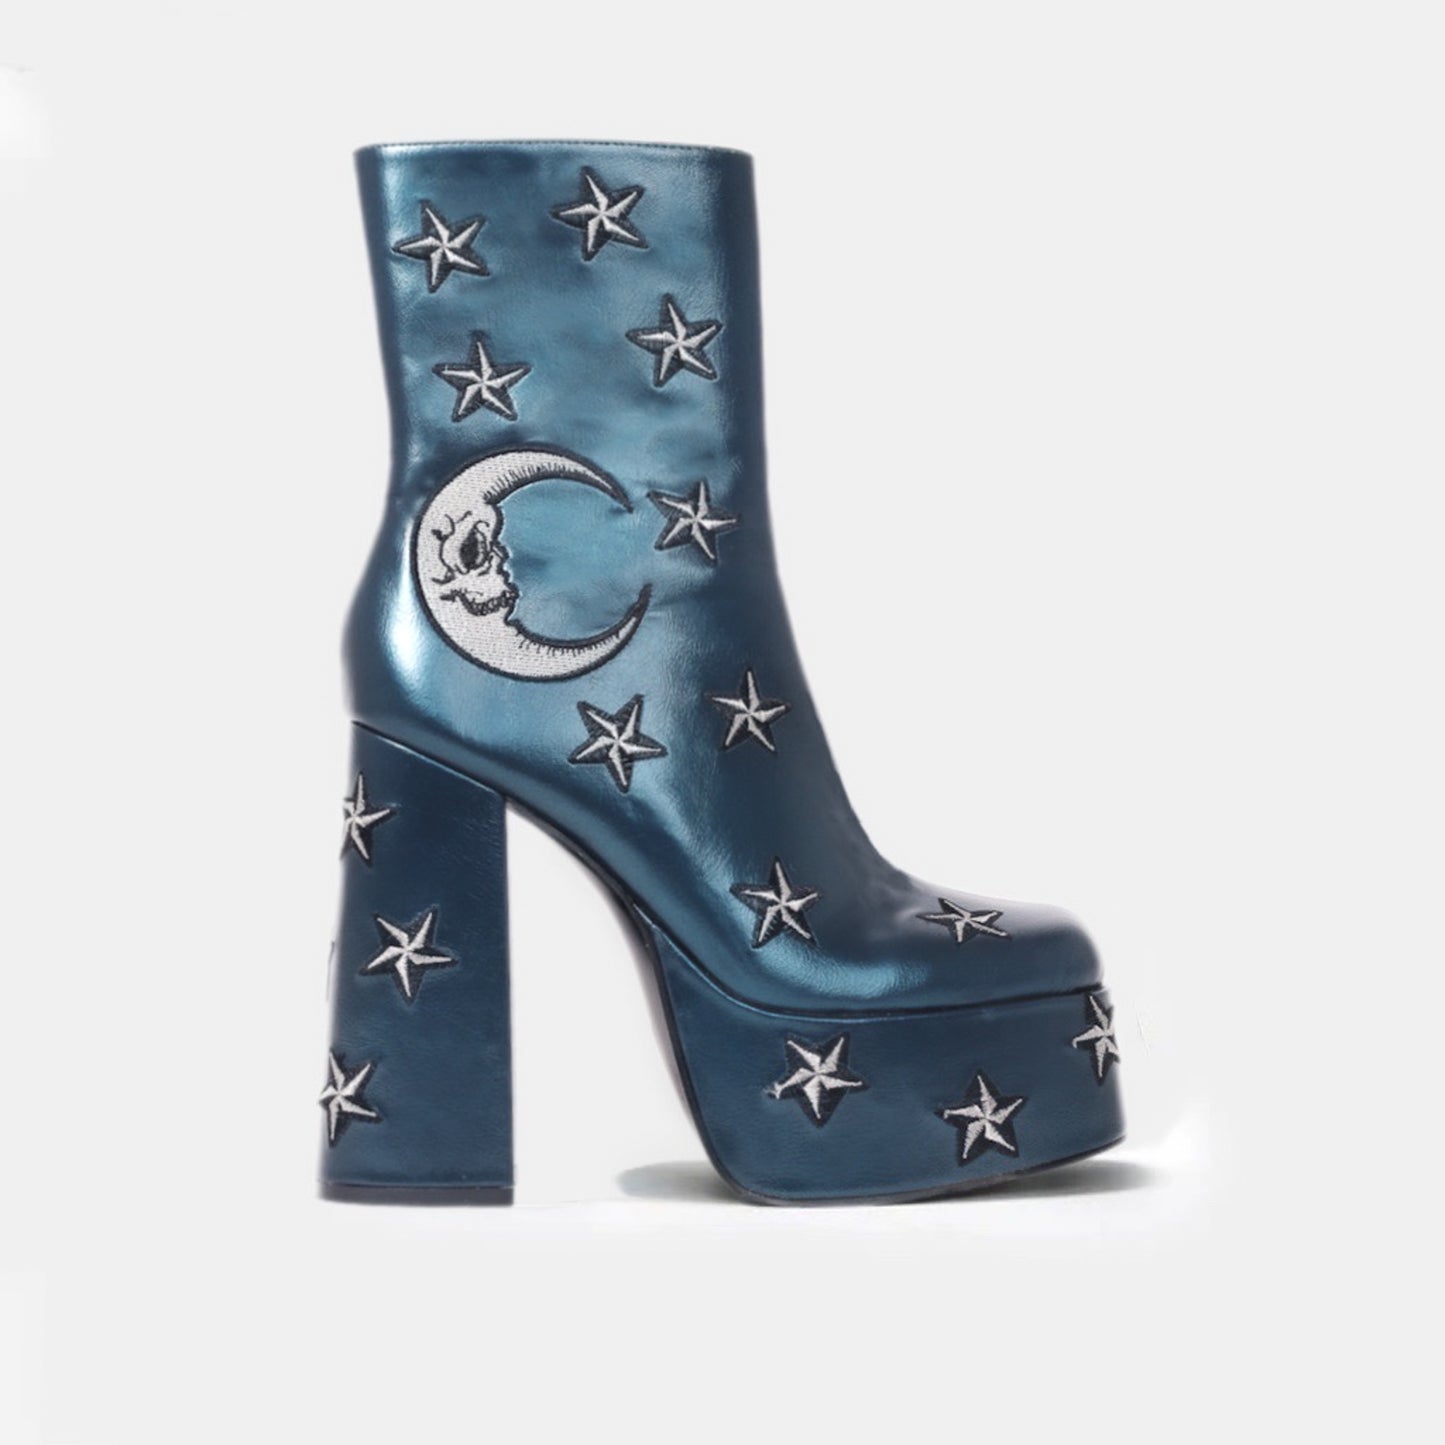 Dreams of Mooncraft Teal Heeled Boots - Ankle Boots - KOI Footwear - Blue - Slide View